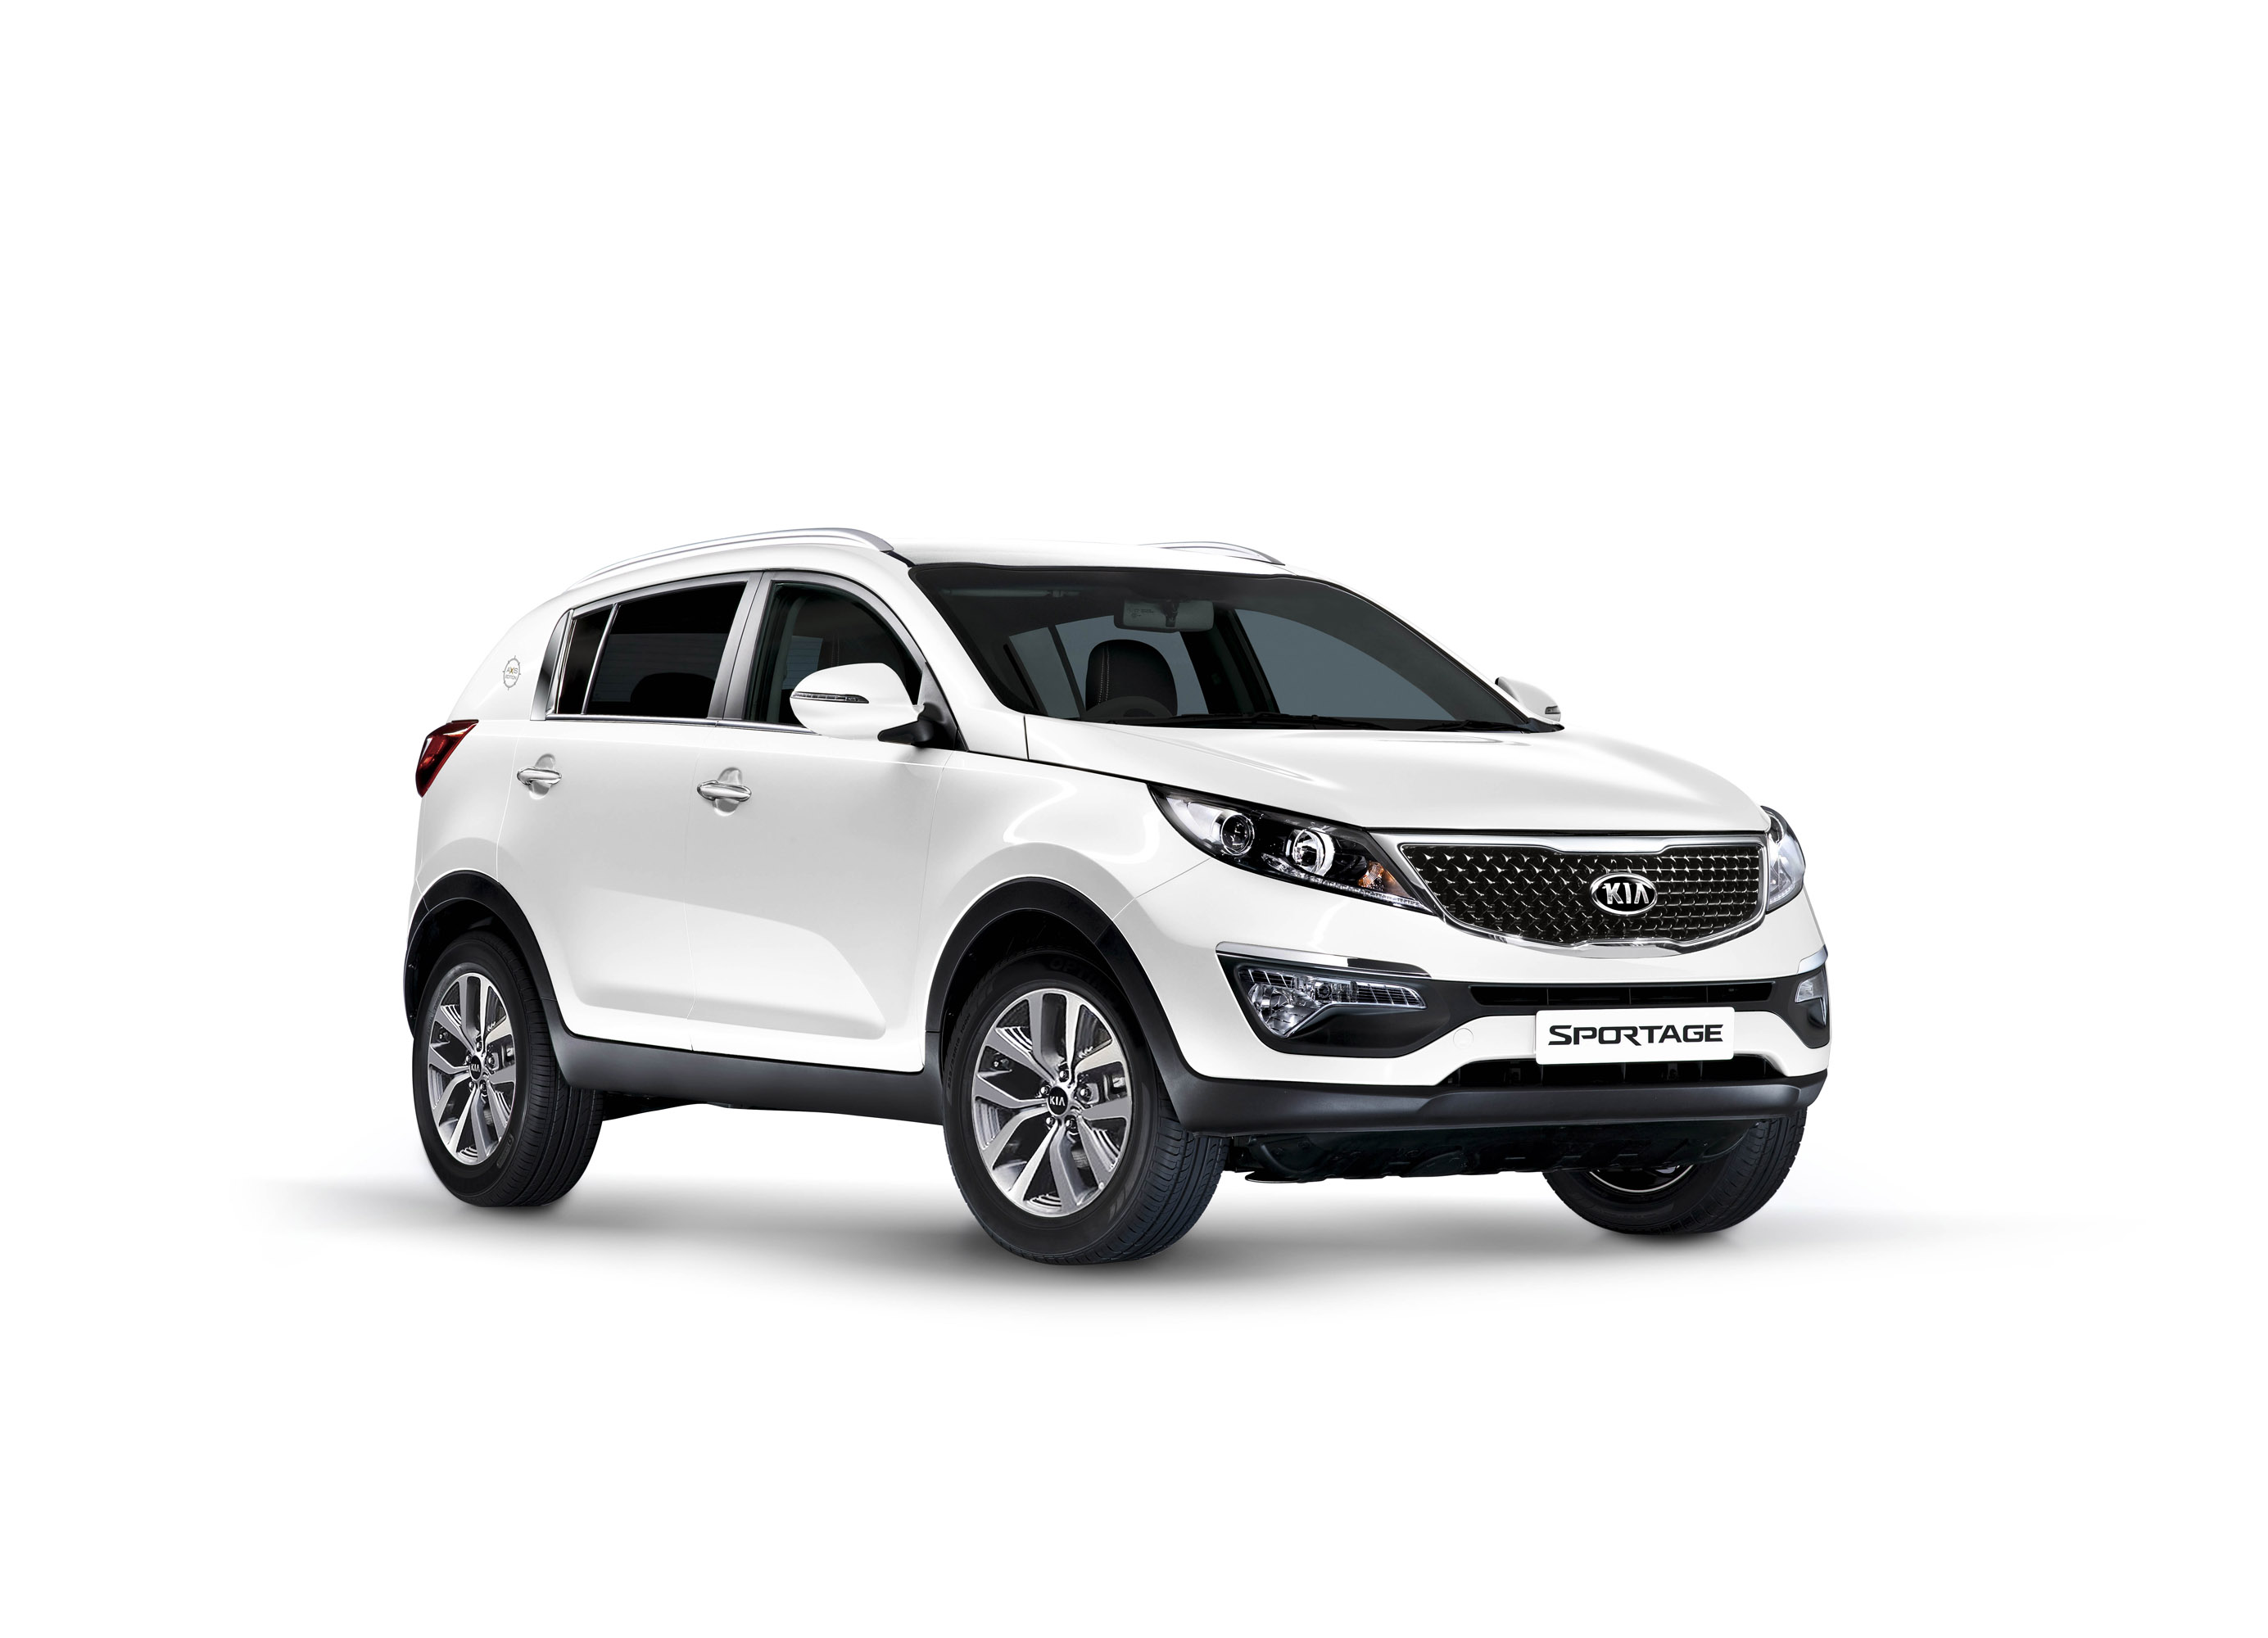 Kia Sportage Axis is here to offer nice performance along with beautiful  exterior and cozy interior